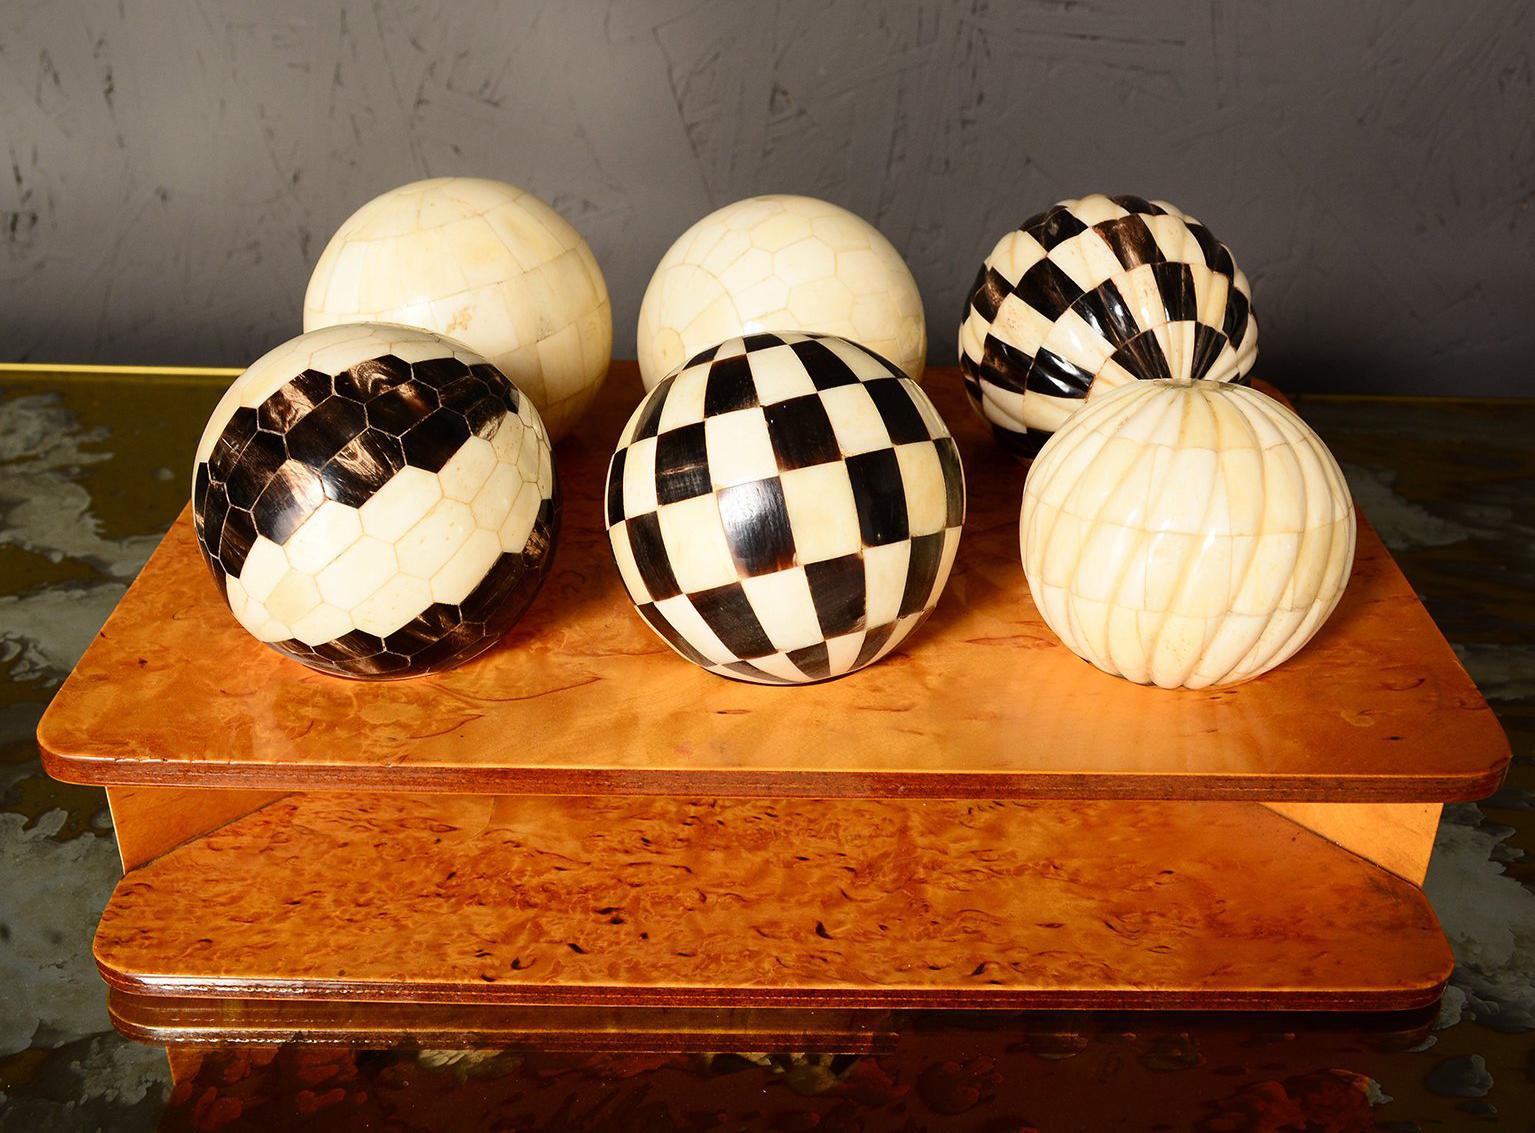 For your consideration a decorative set of six tessellated spheres, each with one design pattern. Made of ox bone and horn.

Custom display in burl wood tray. 

Unmarked, no information on the maker.
The tray measures 12